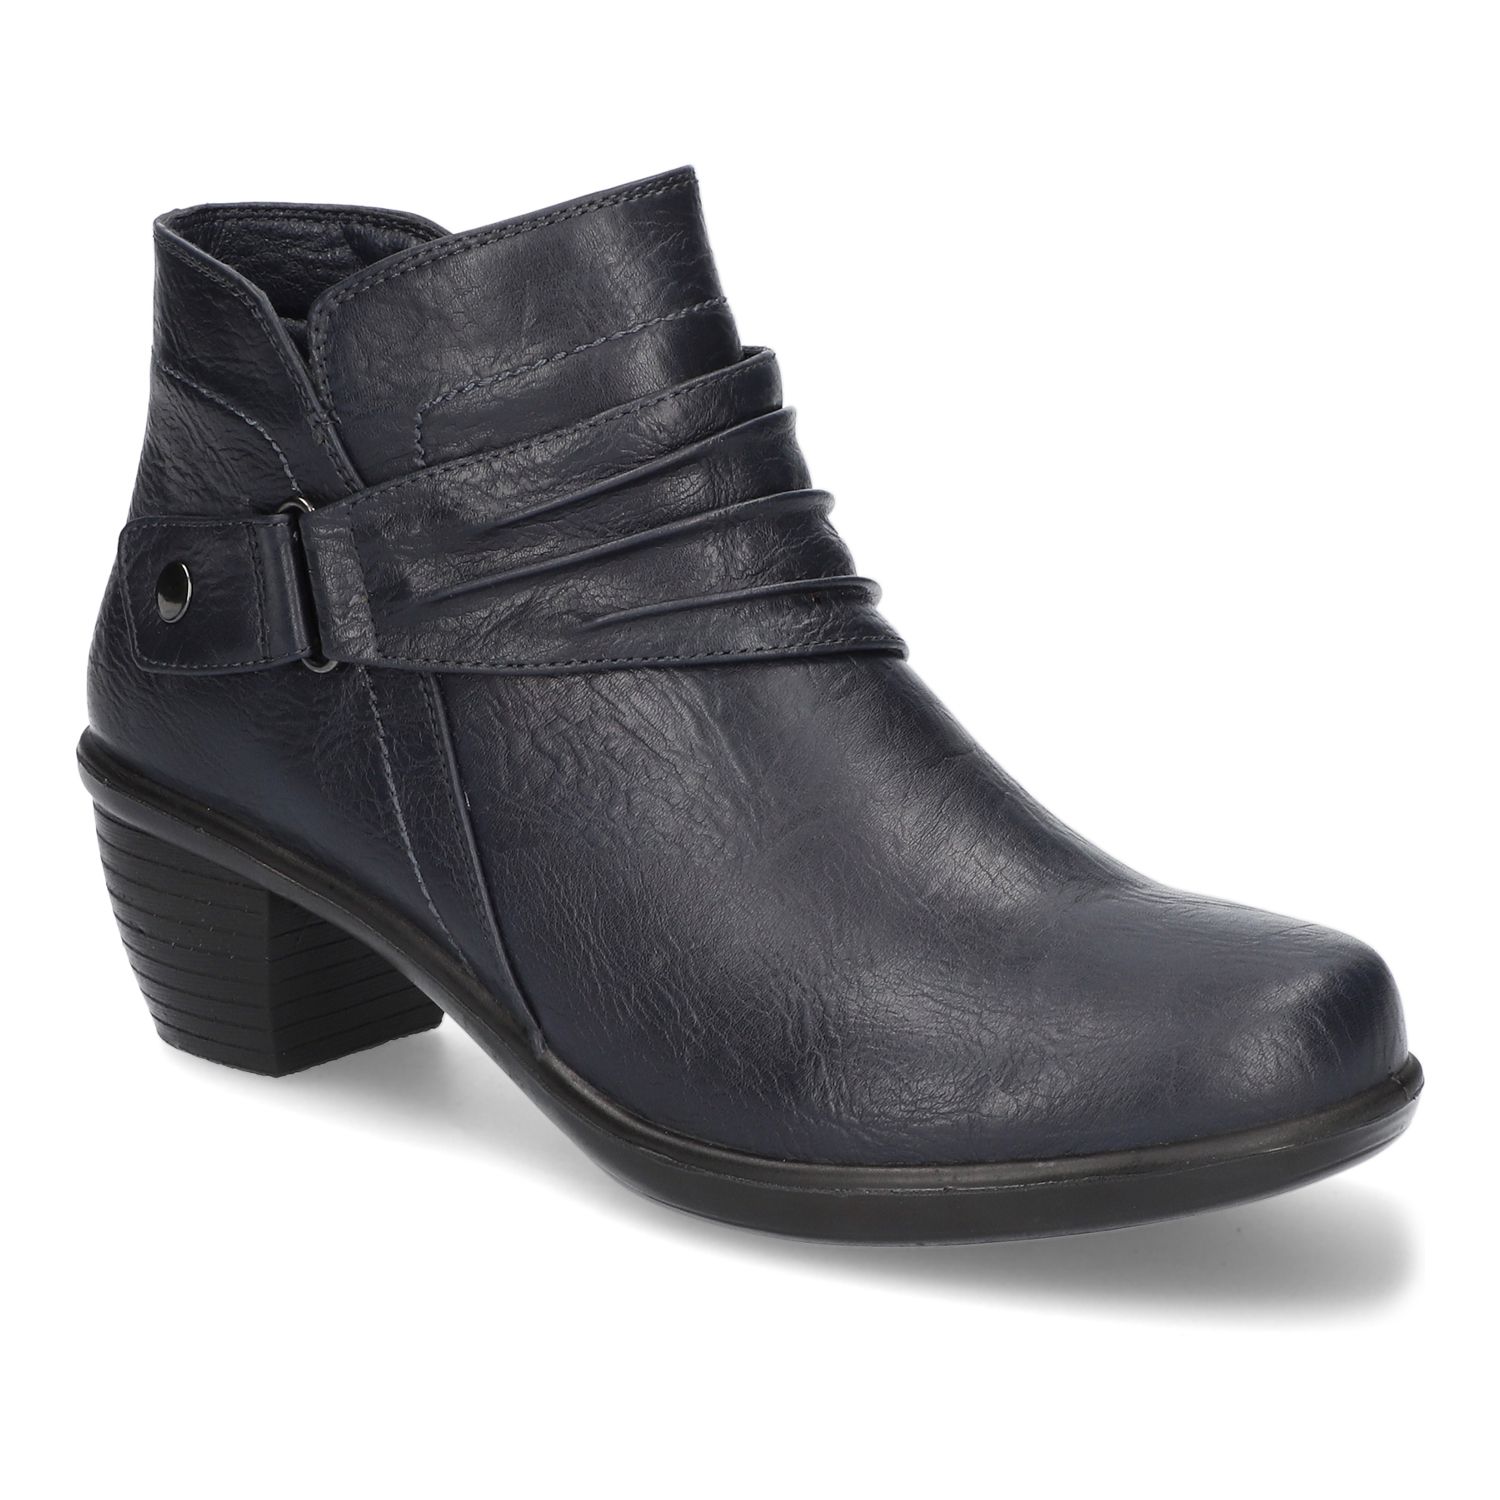 Image for Easy Street Damita Women's Ankle Boots at Kohl's.